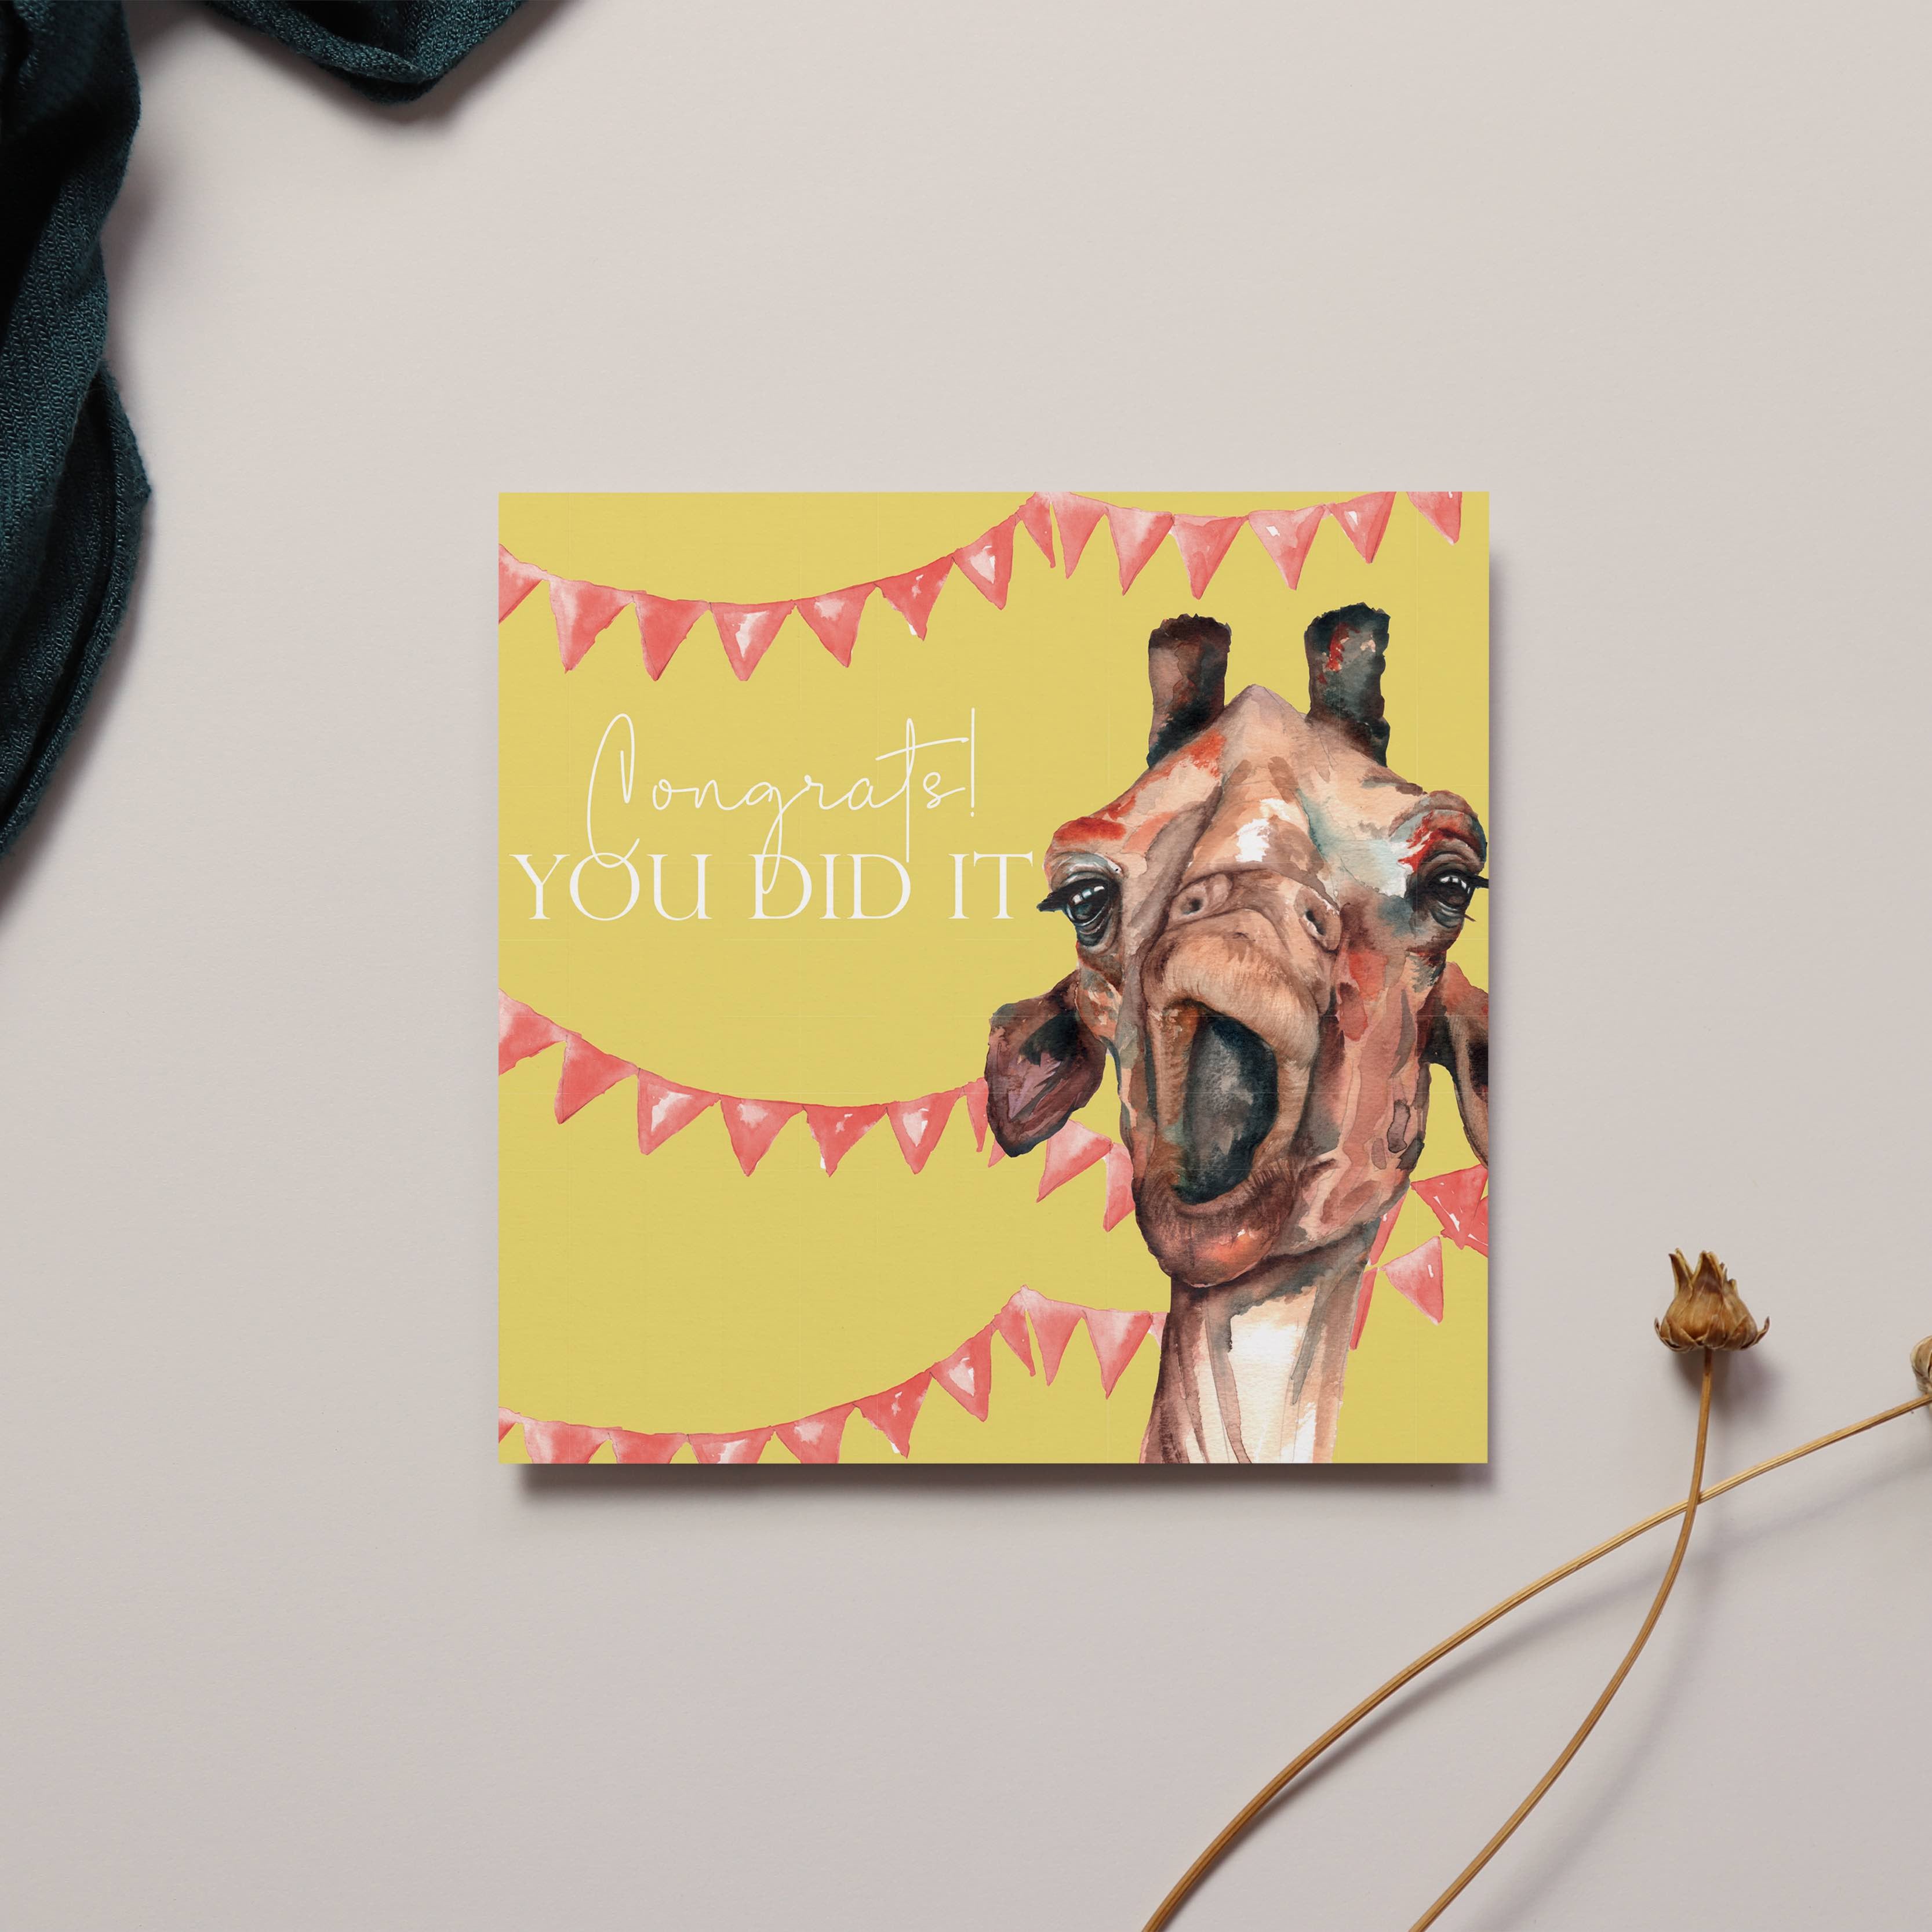 Congrats! Your Did It  Sentiment Card